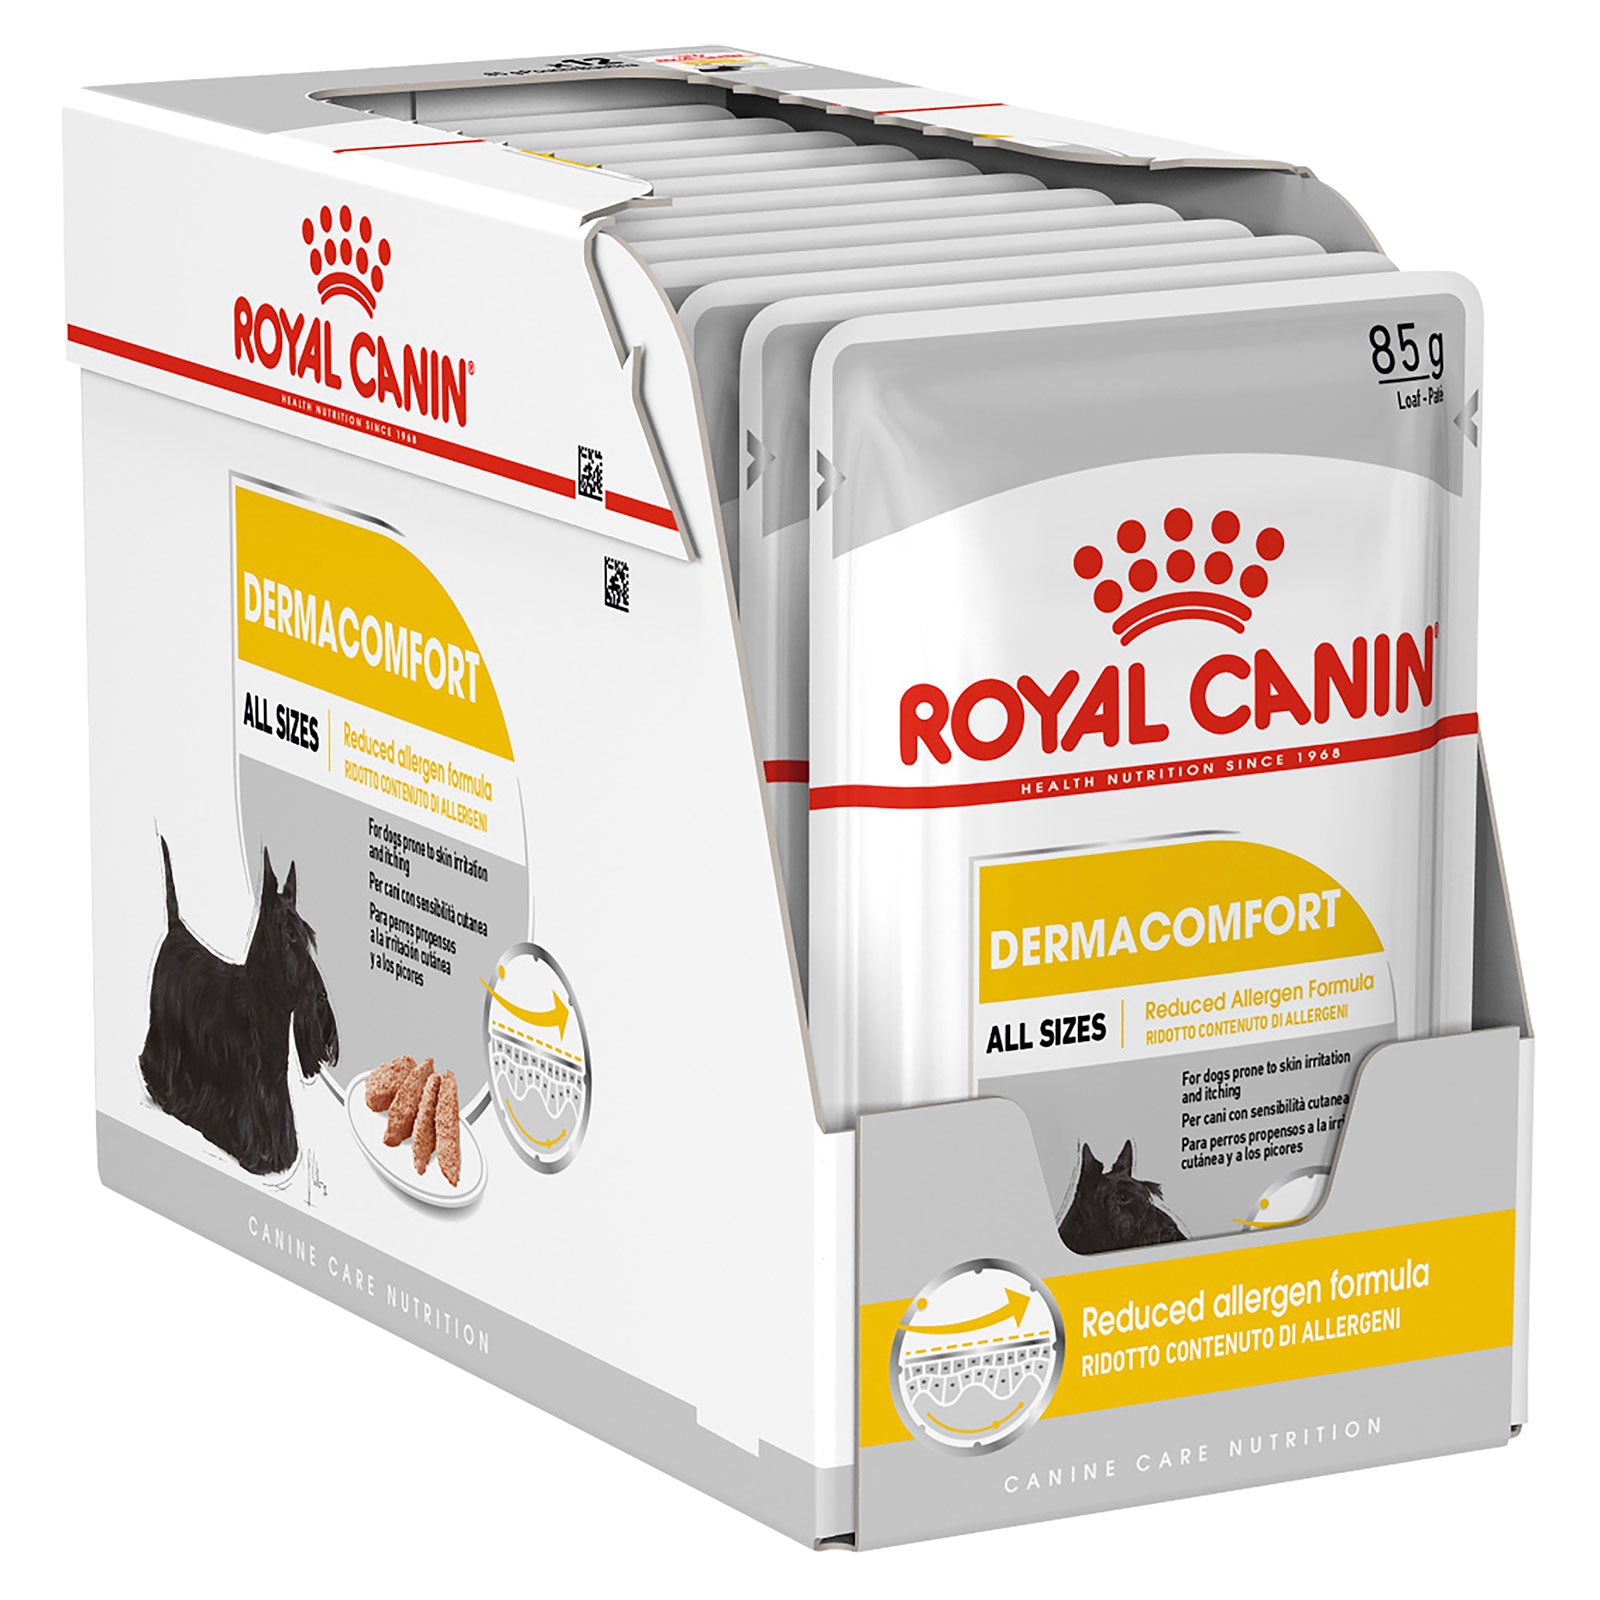 Royal Canin Dog Food Pouch Dermacomfort